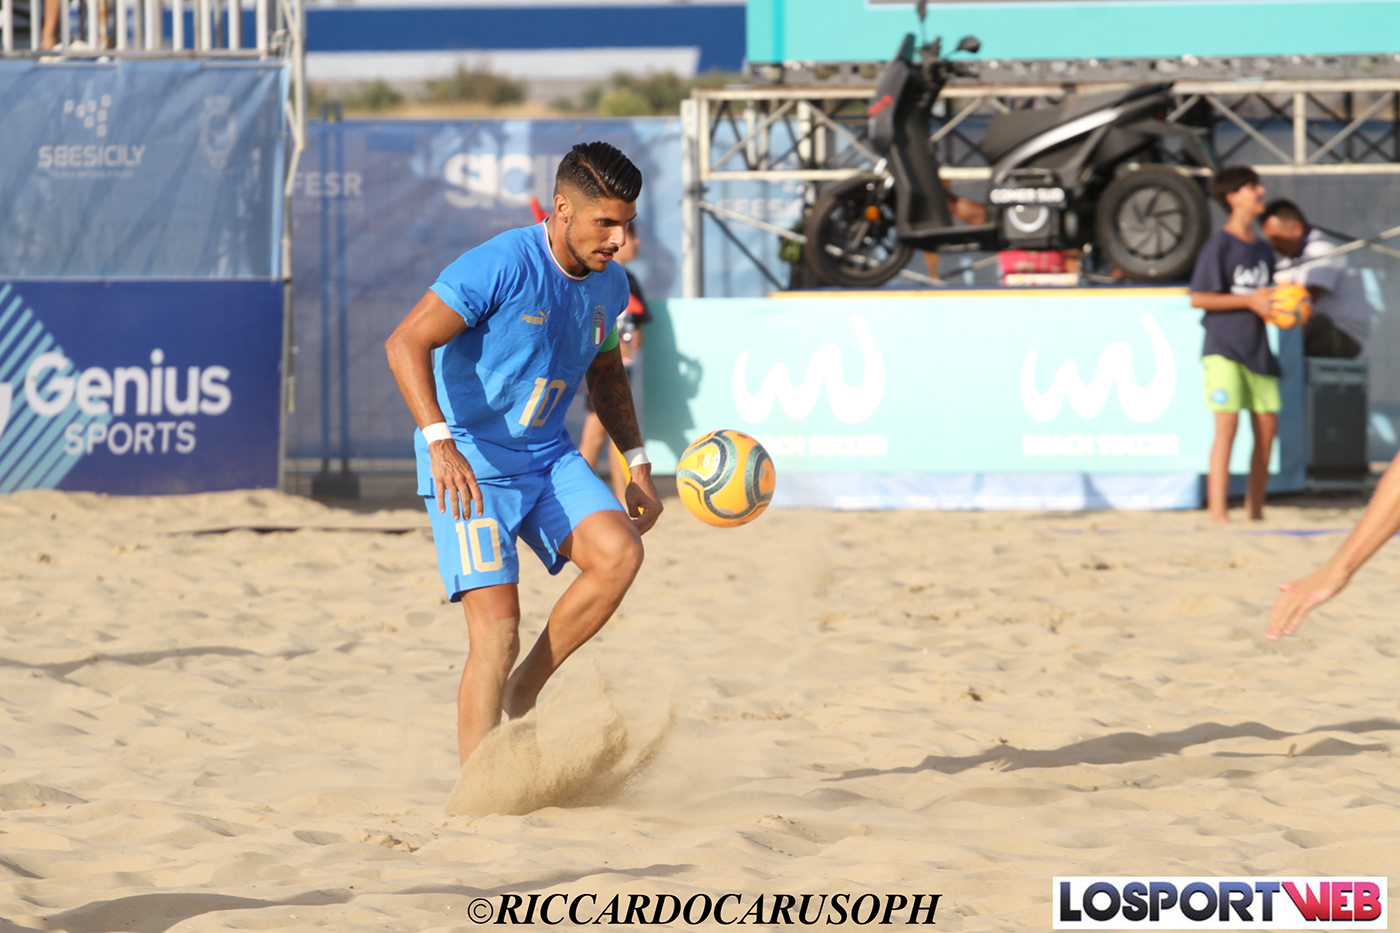 photographer photoshoot Fotografia Photography  sports beach soccer Championship athletic game Euro Qualifiers